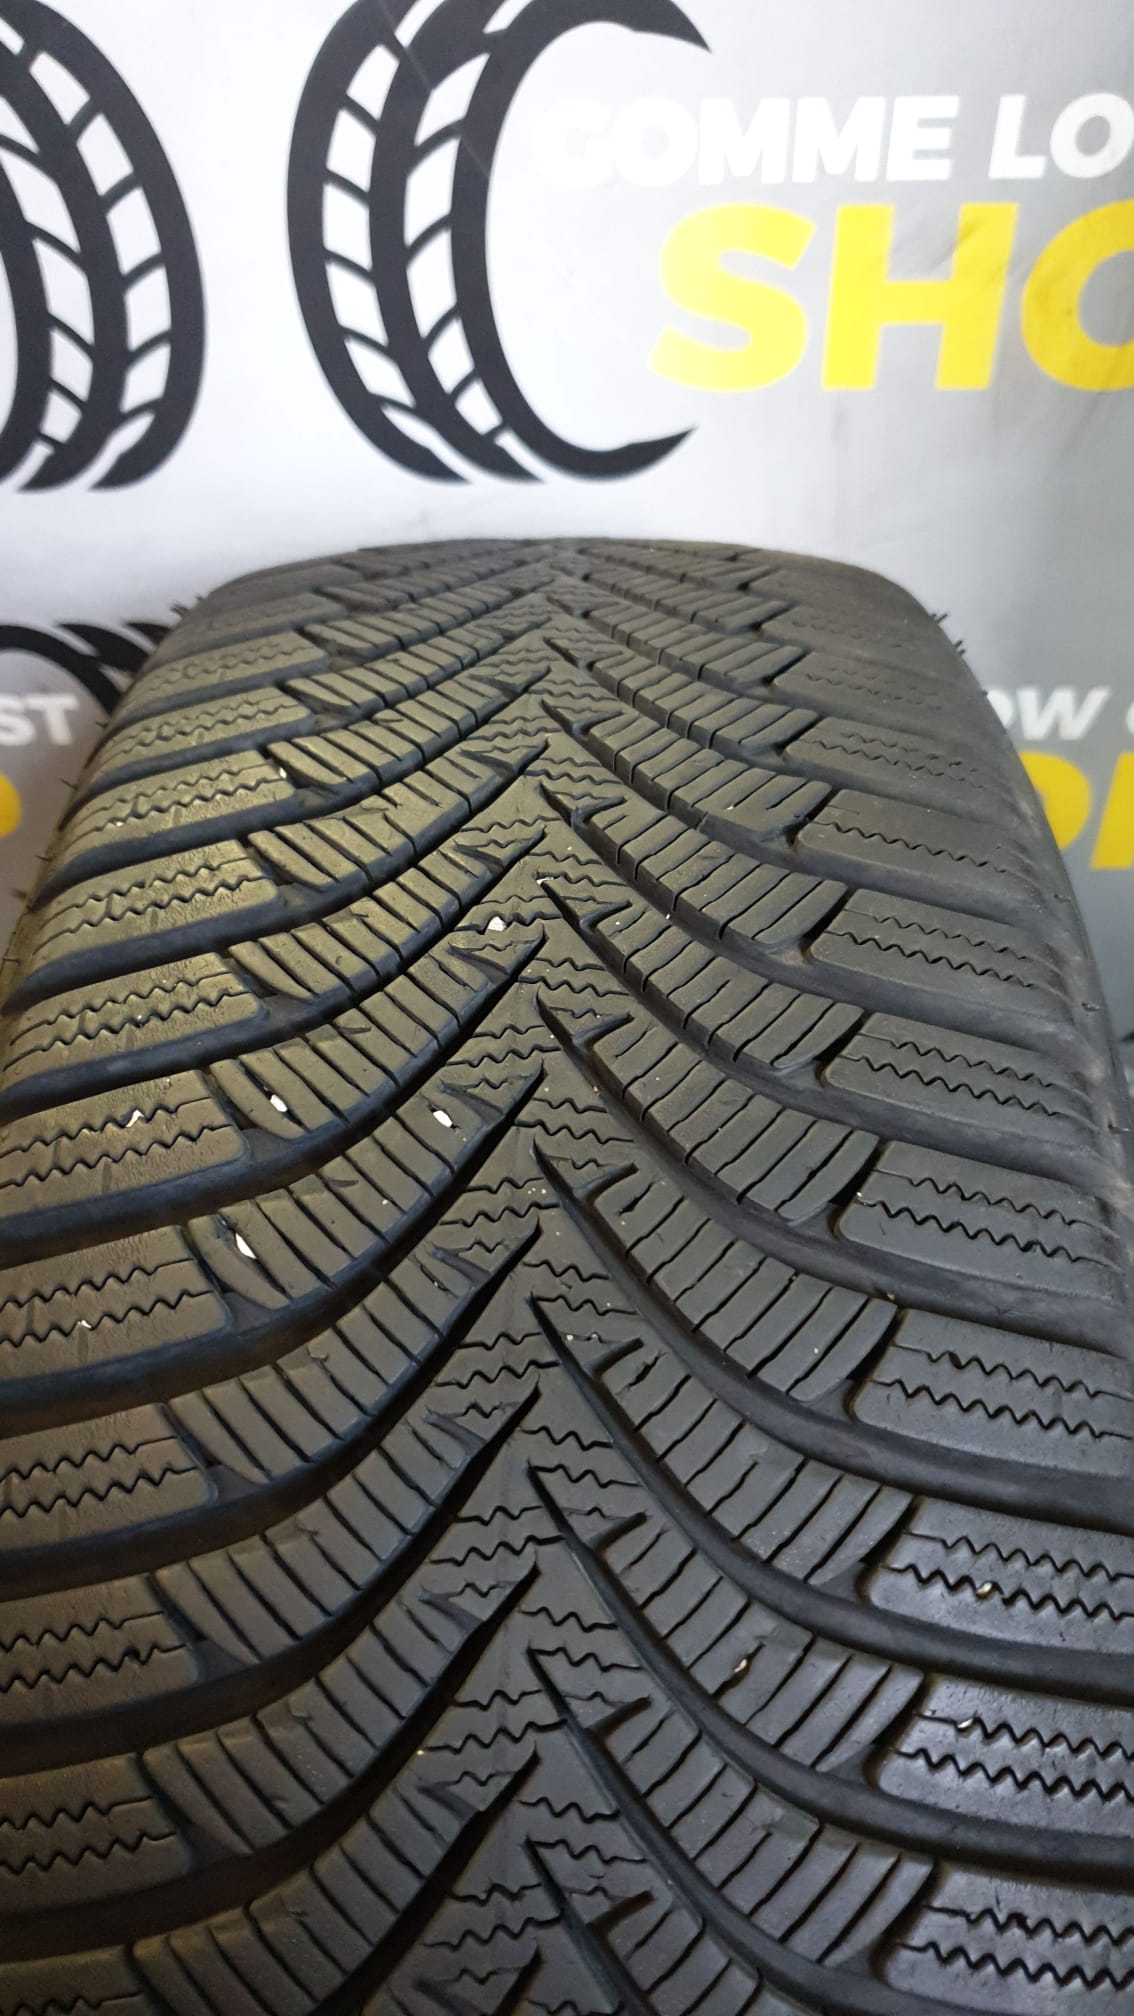 PNEUMATICI USATI – 205 55 R 16 – 94 – H – HANKOOK - Gomme Low Cost